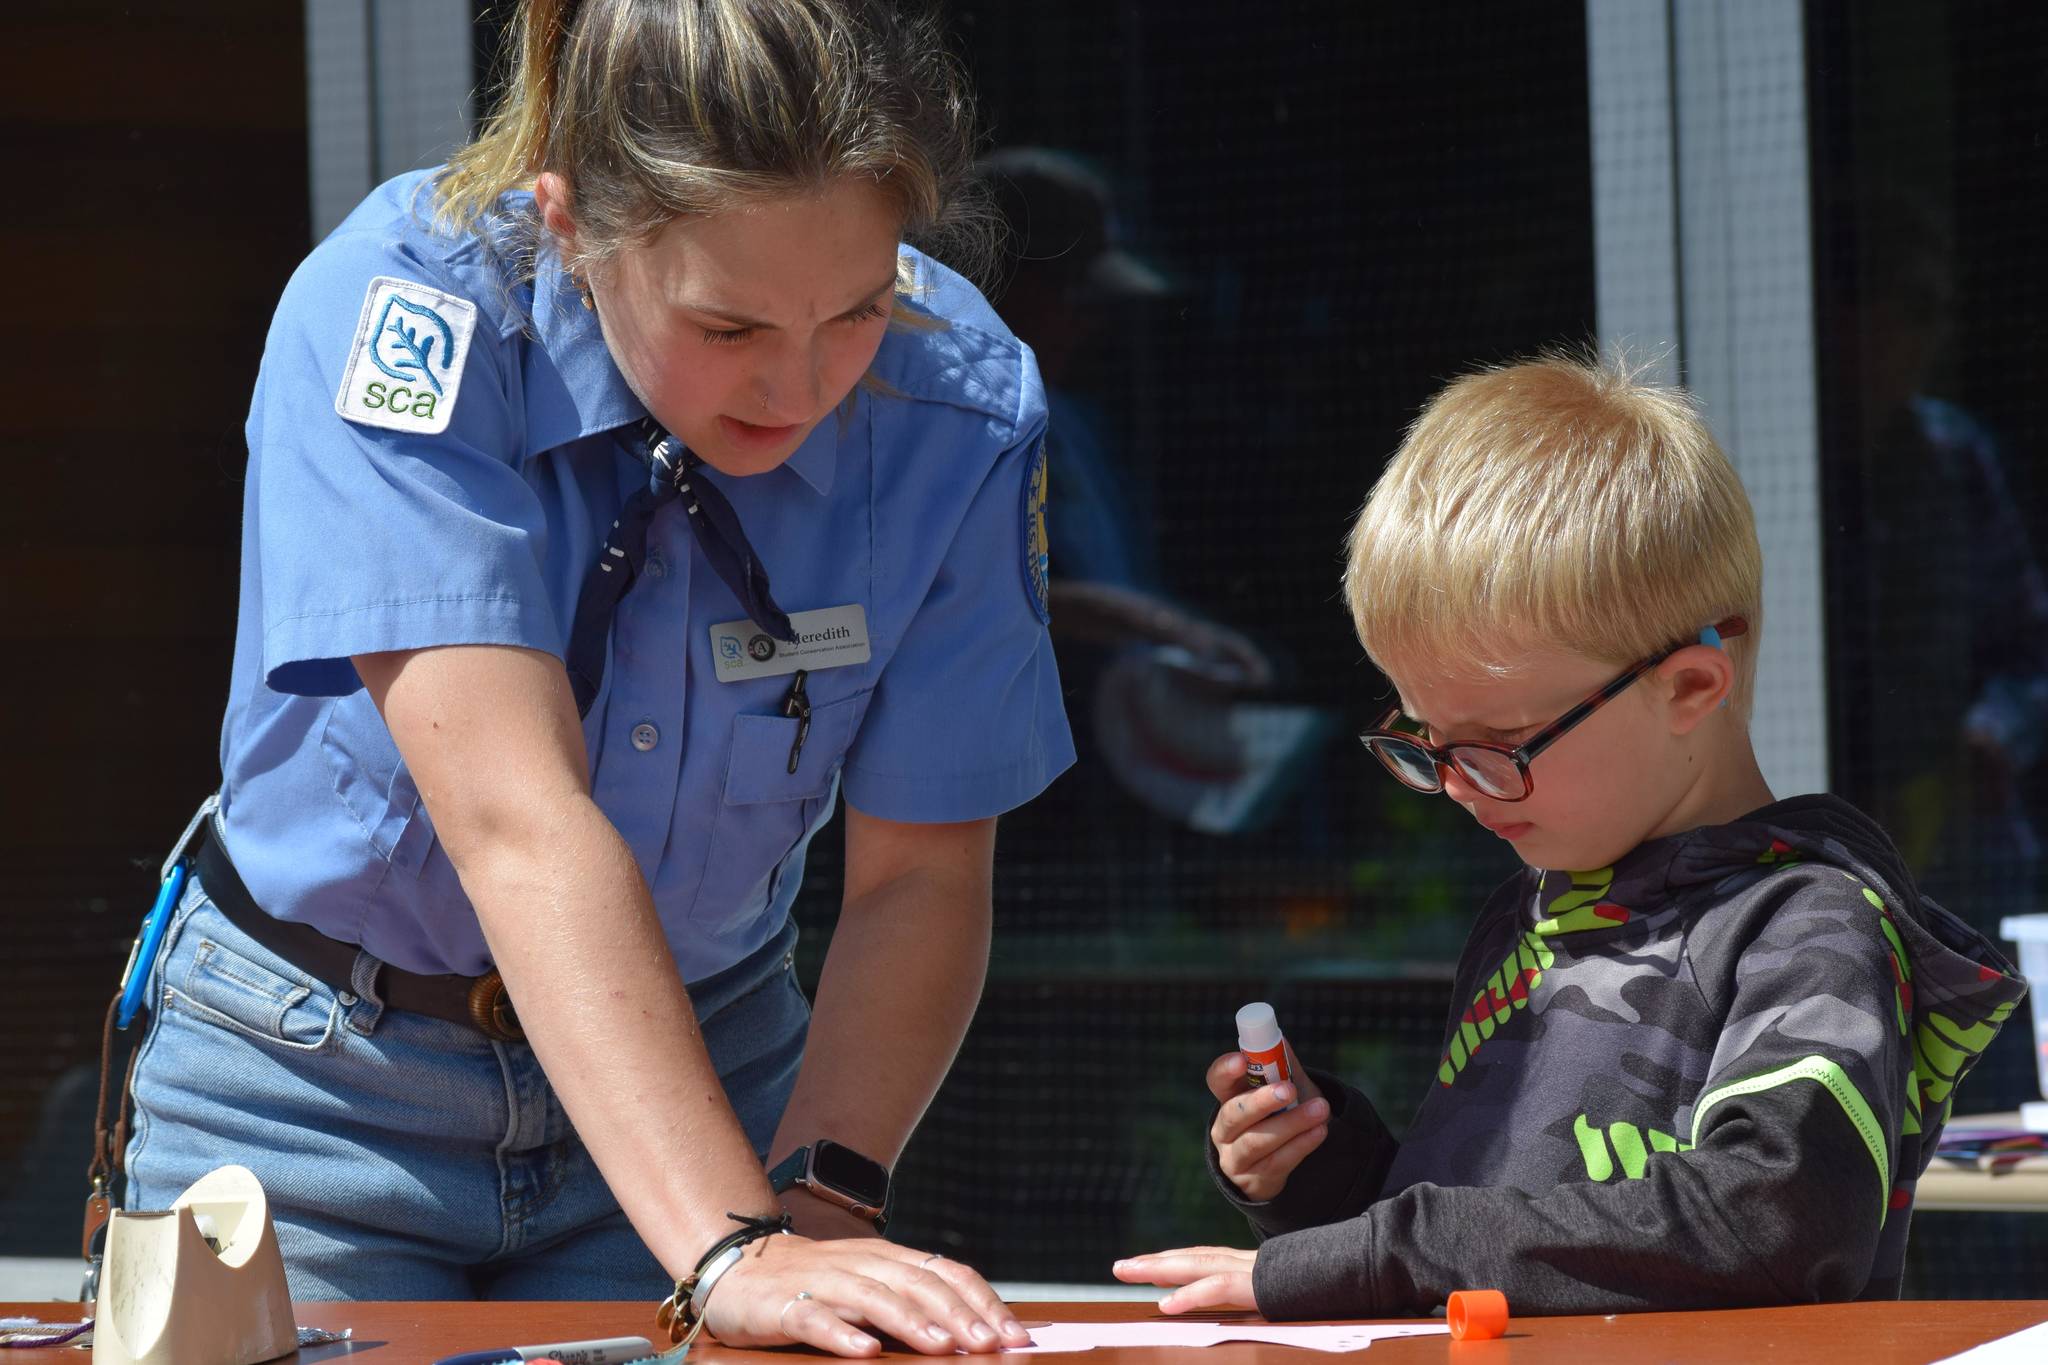 Ranger Meredith Baker helps Fredrick Bryant decorate a fish mobile at the Kenai Wildlife Refuge Visitor Center on July 6, 2021 for Fish Week. (Camille Botello / Peninsula Clarion)